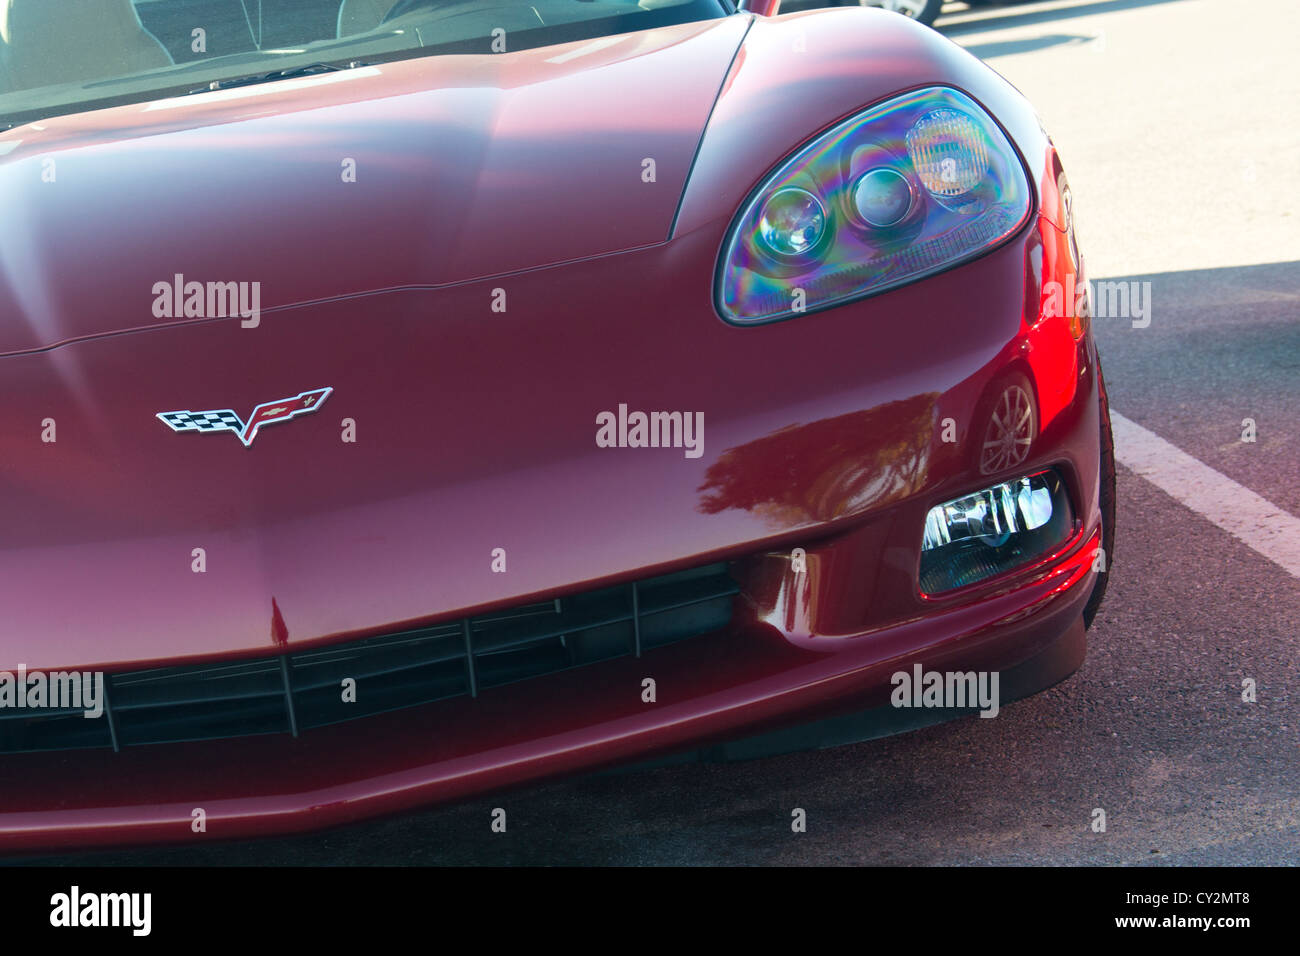 Chevrolet Corvette sports car front end in red. USA Stock Photo